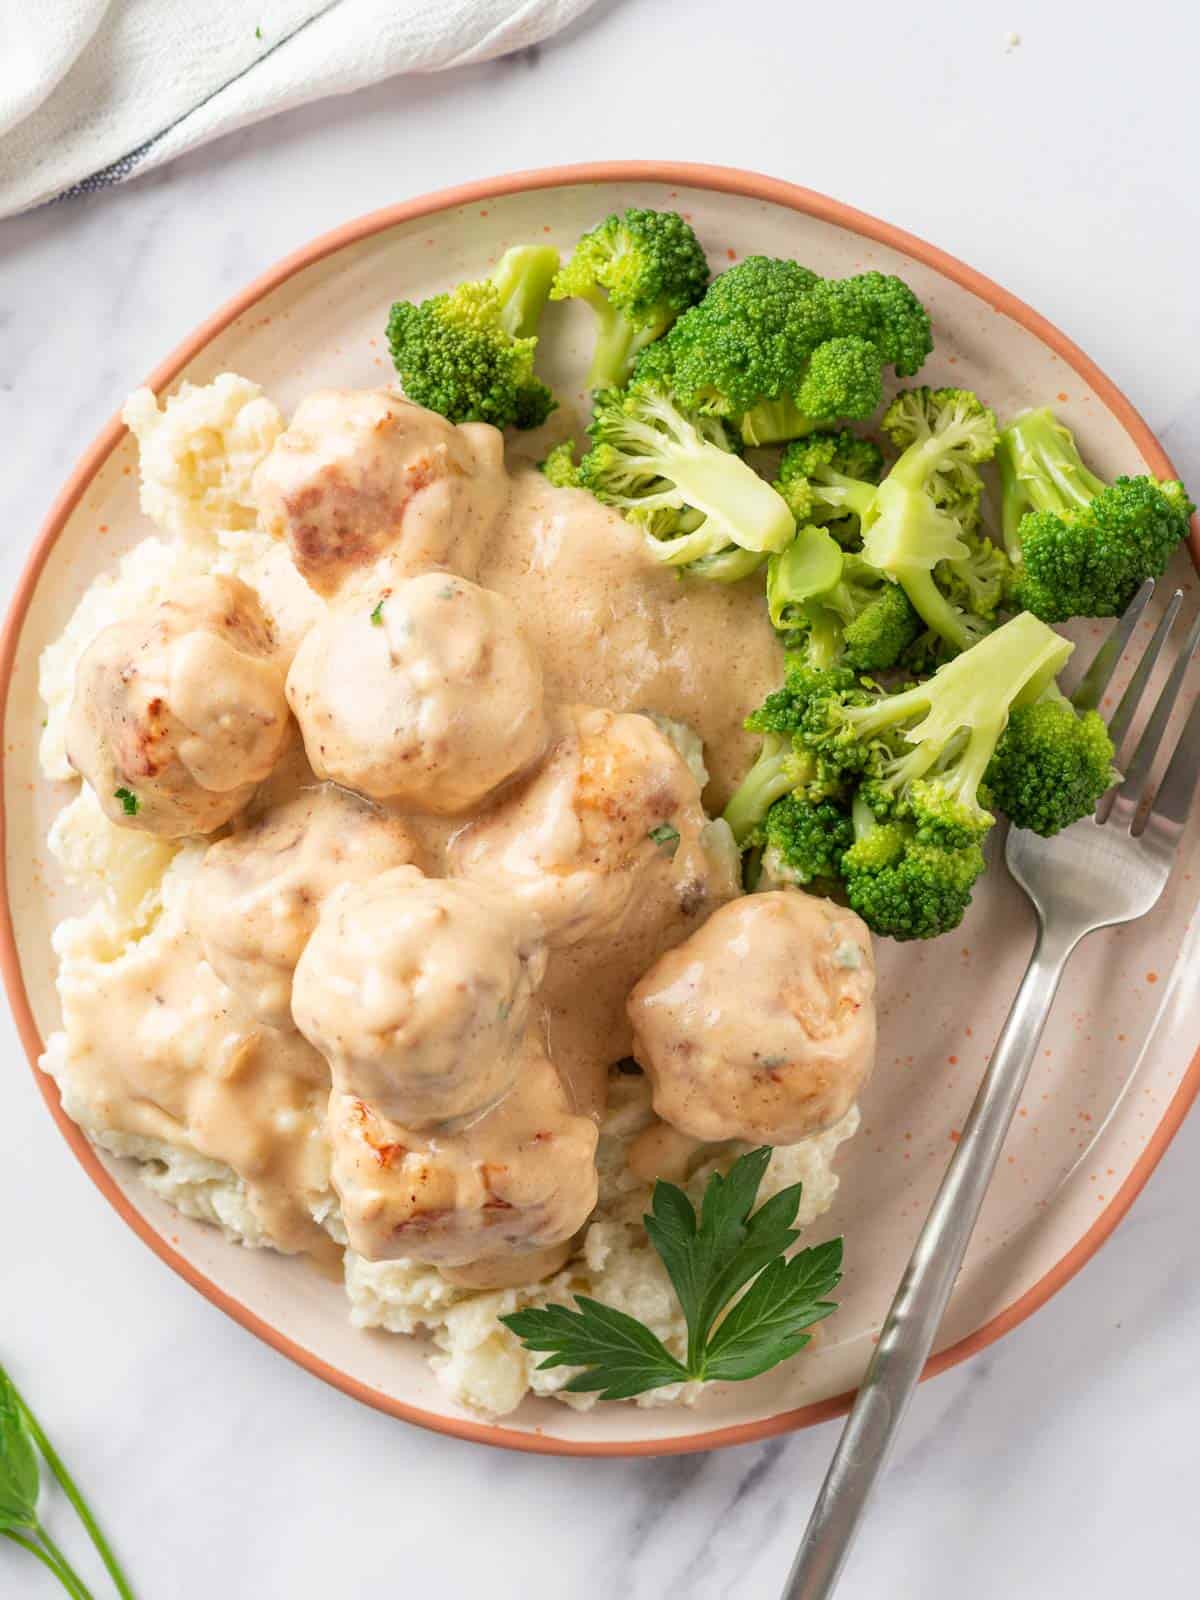 A plate of Swedish meatballs with broccoli.